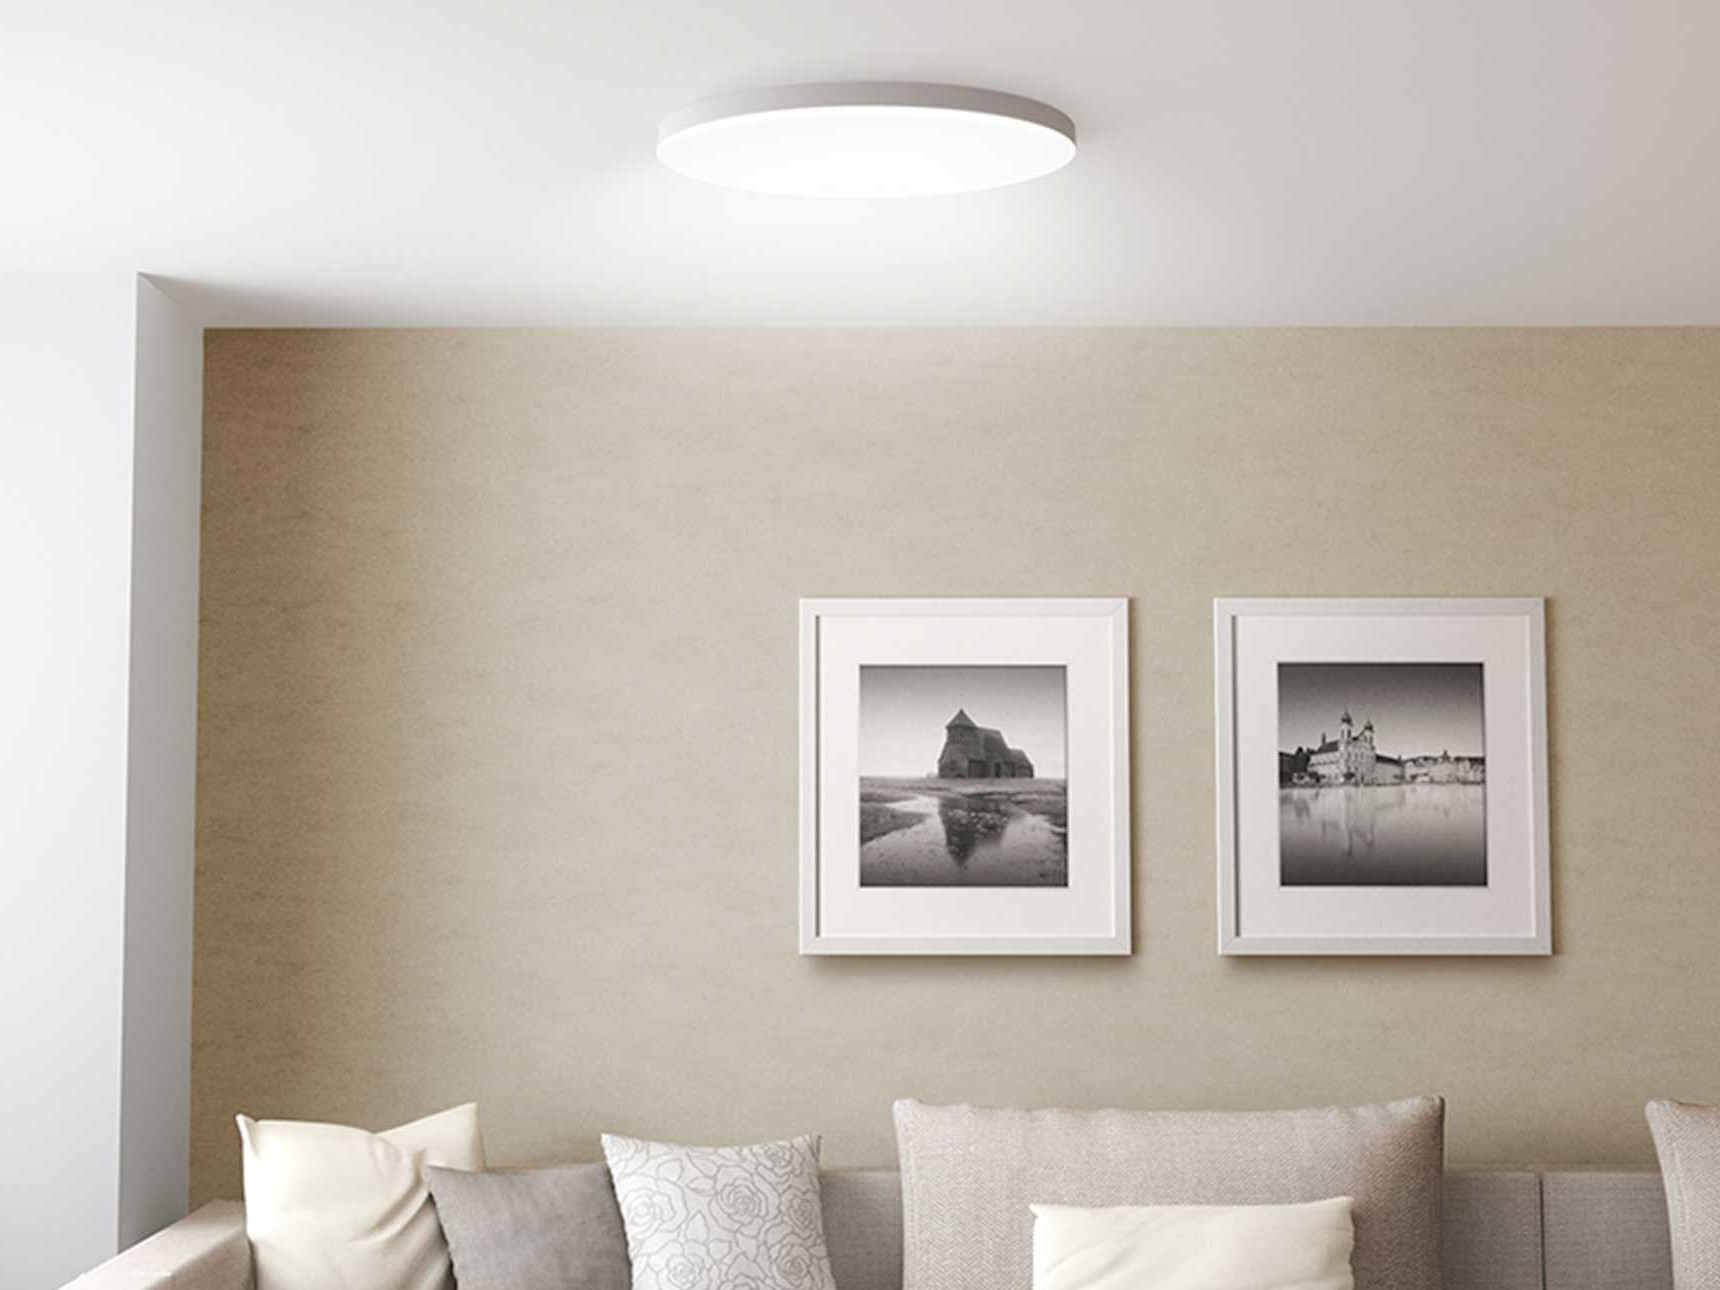 Xiaomi Mi Smart Led Ceiling Light With